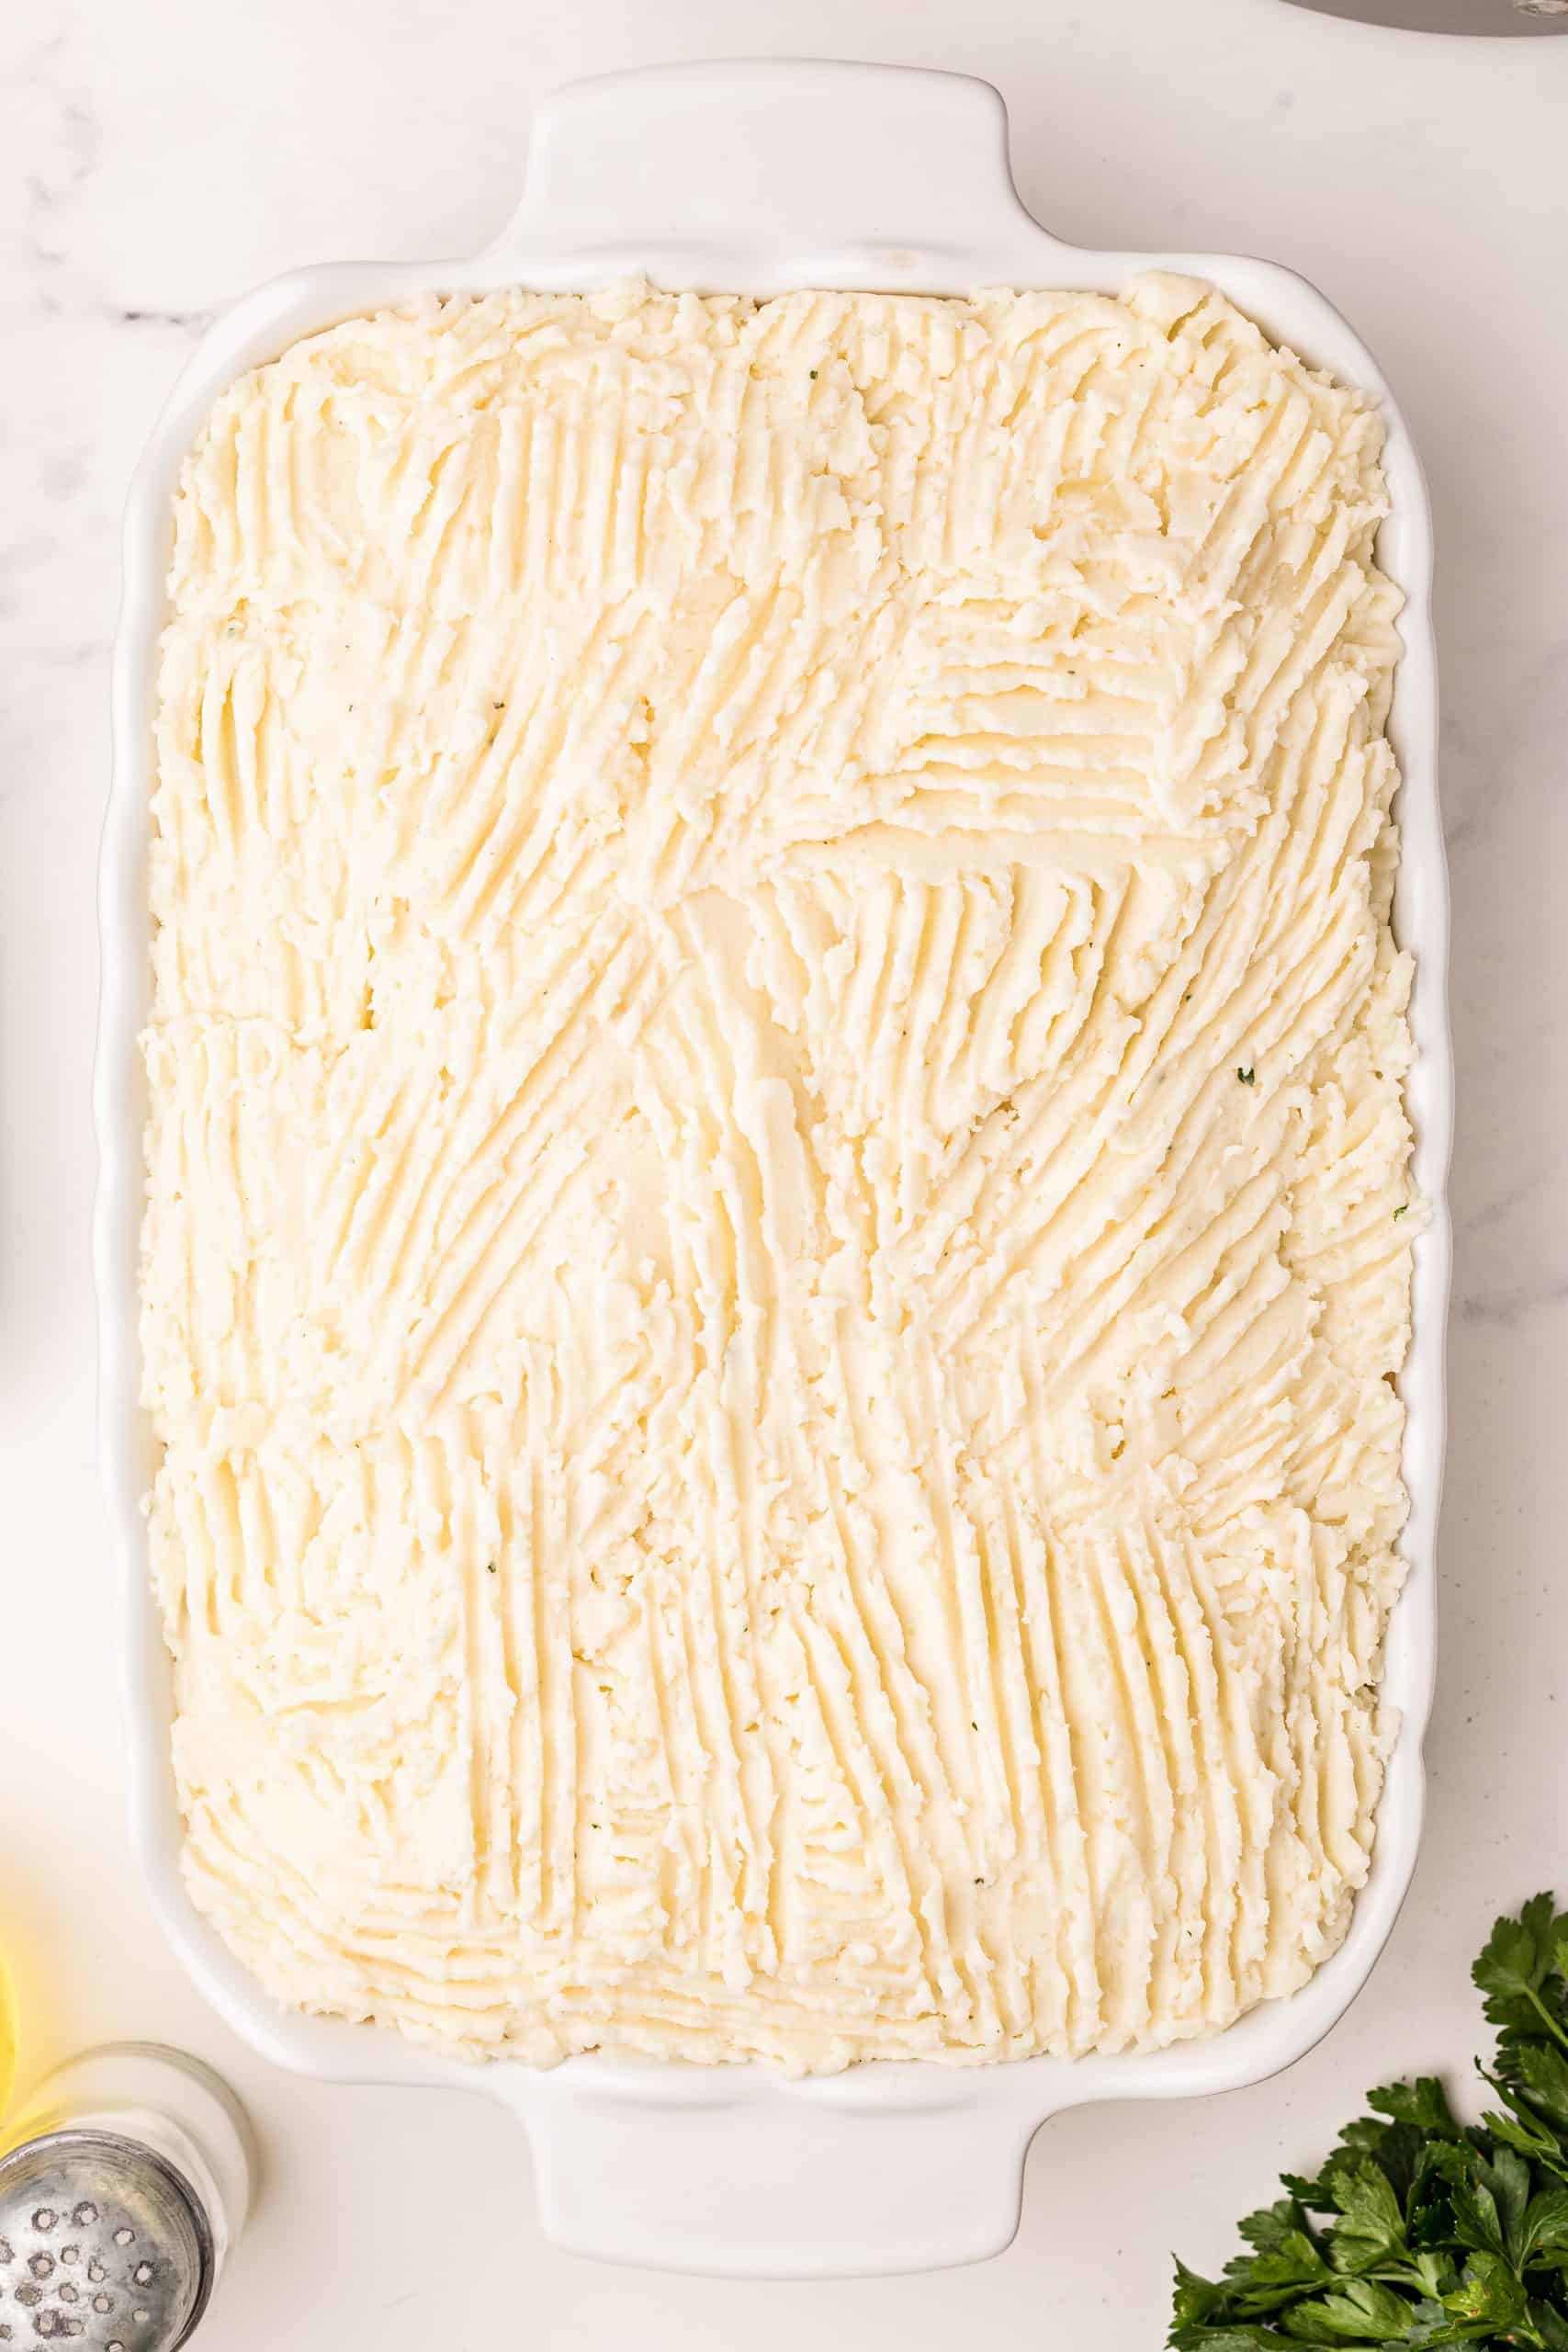 meat mixture in casserole dish fully covered by a layer of mashed potatoes.